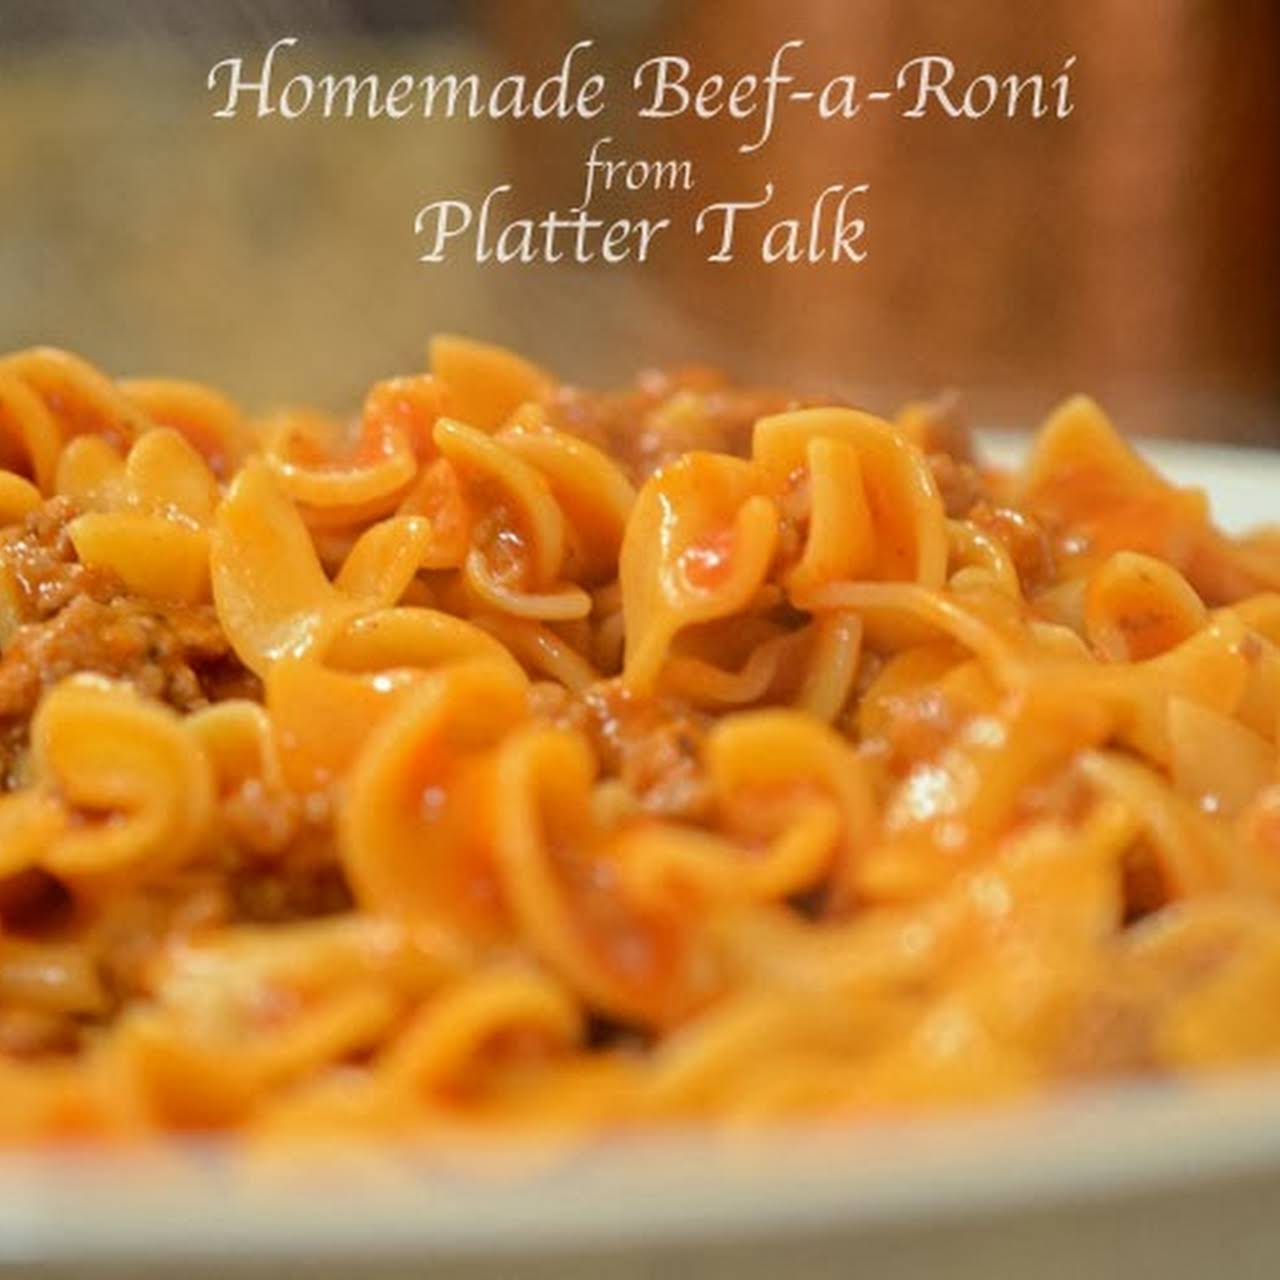 Homemade Beef-A-Roni